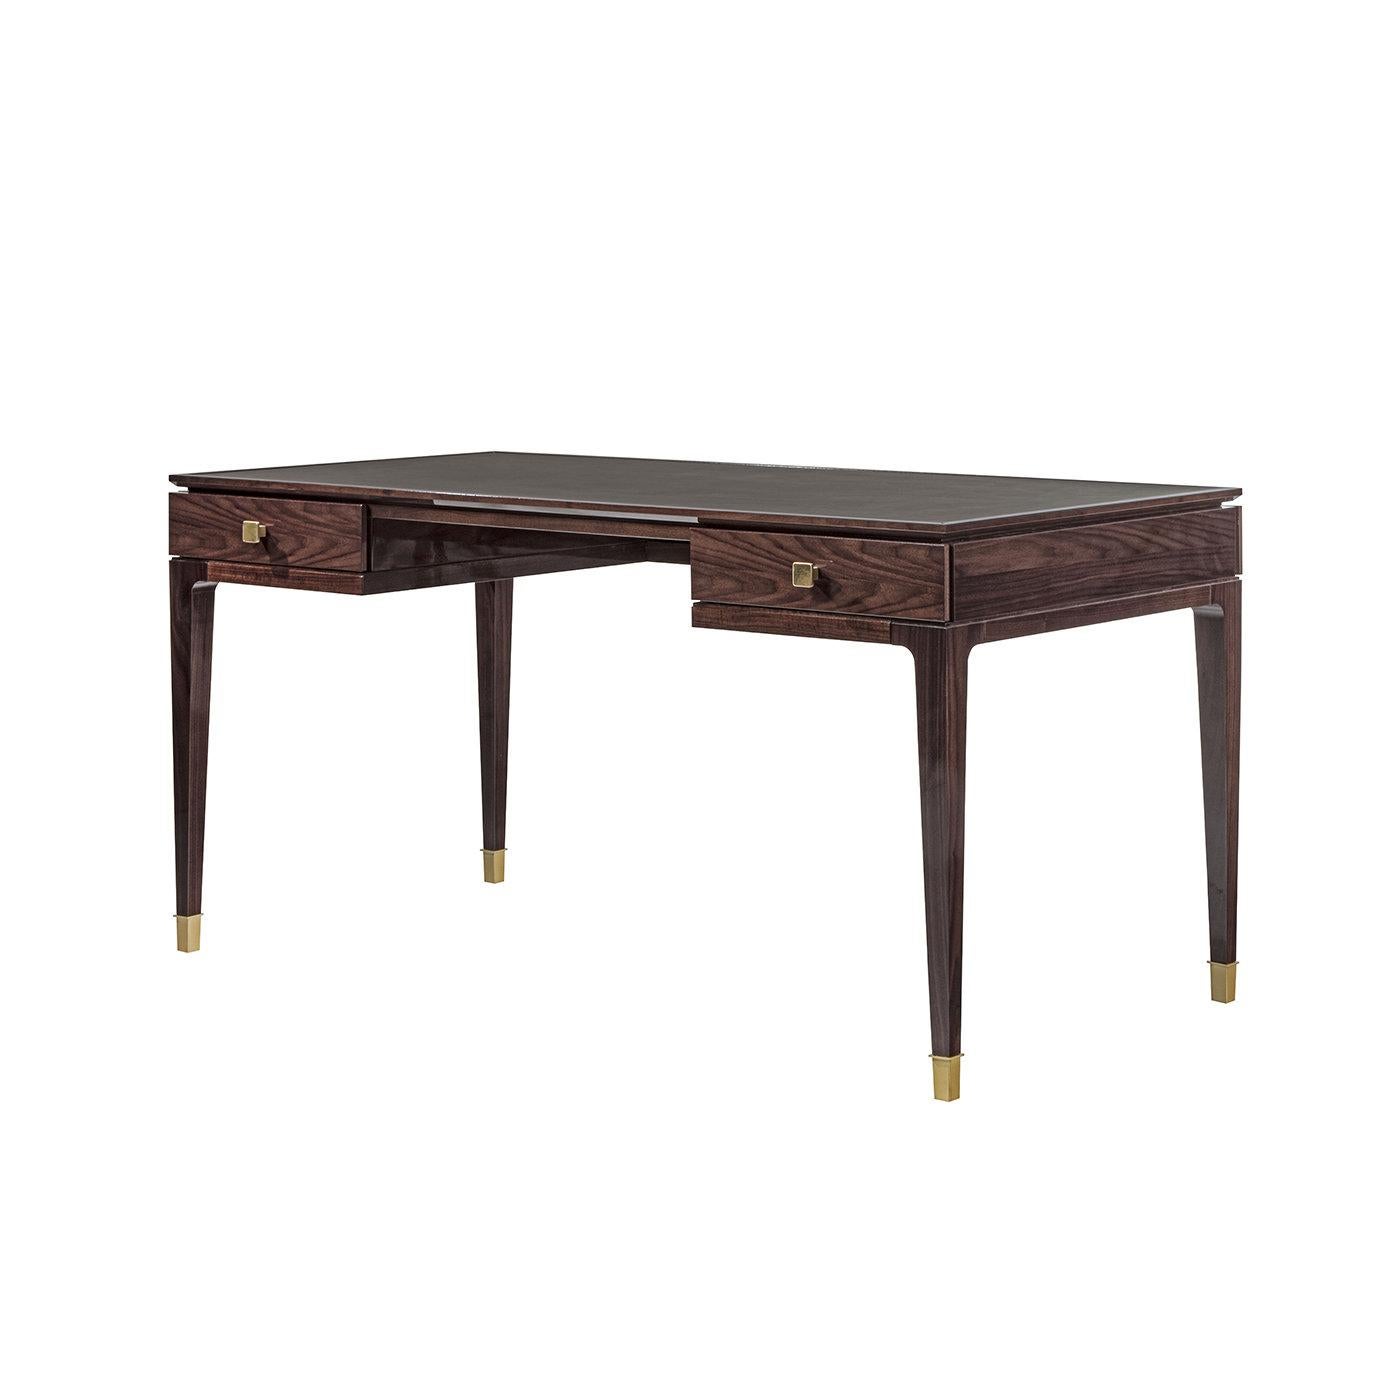 This desk was inspired by traits of Art Deco and architecture typical of the Japanese city of Nara. Its graceful frame in glossy, tobacco-finished walnut boasts slender, tapered legs with brass caps and sustains the topping panel in prized leather.